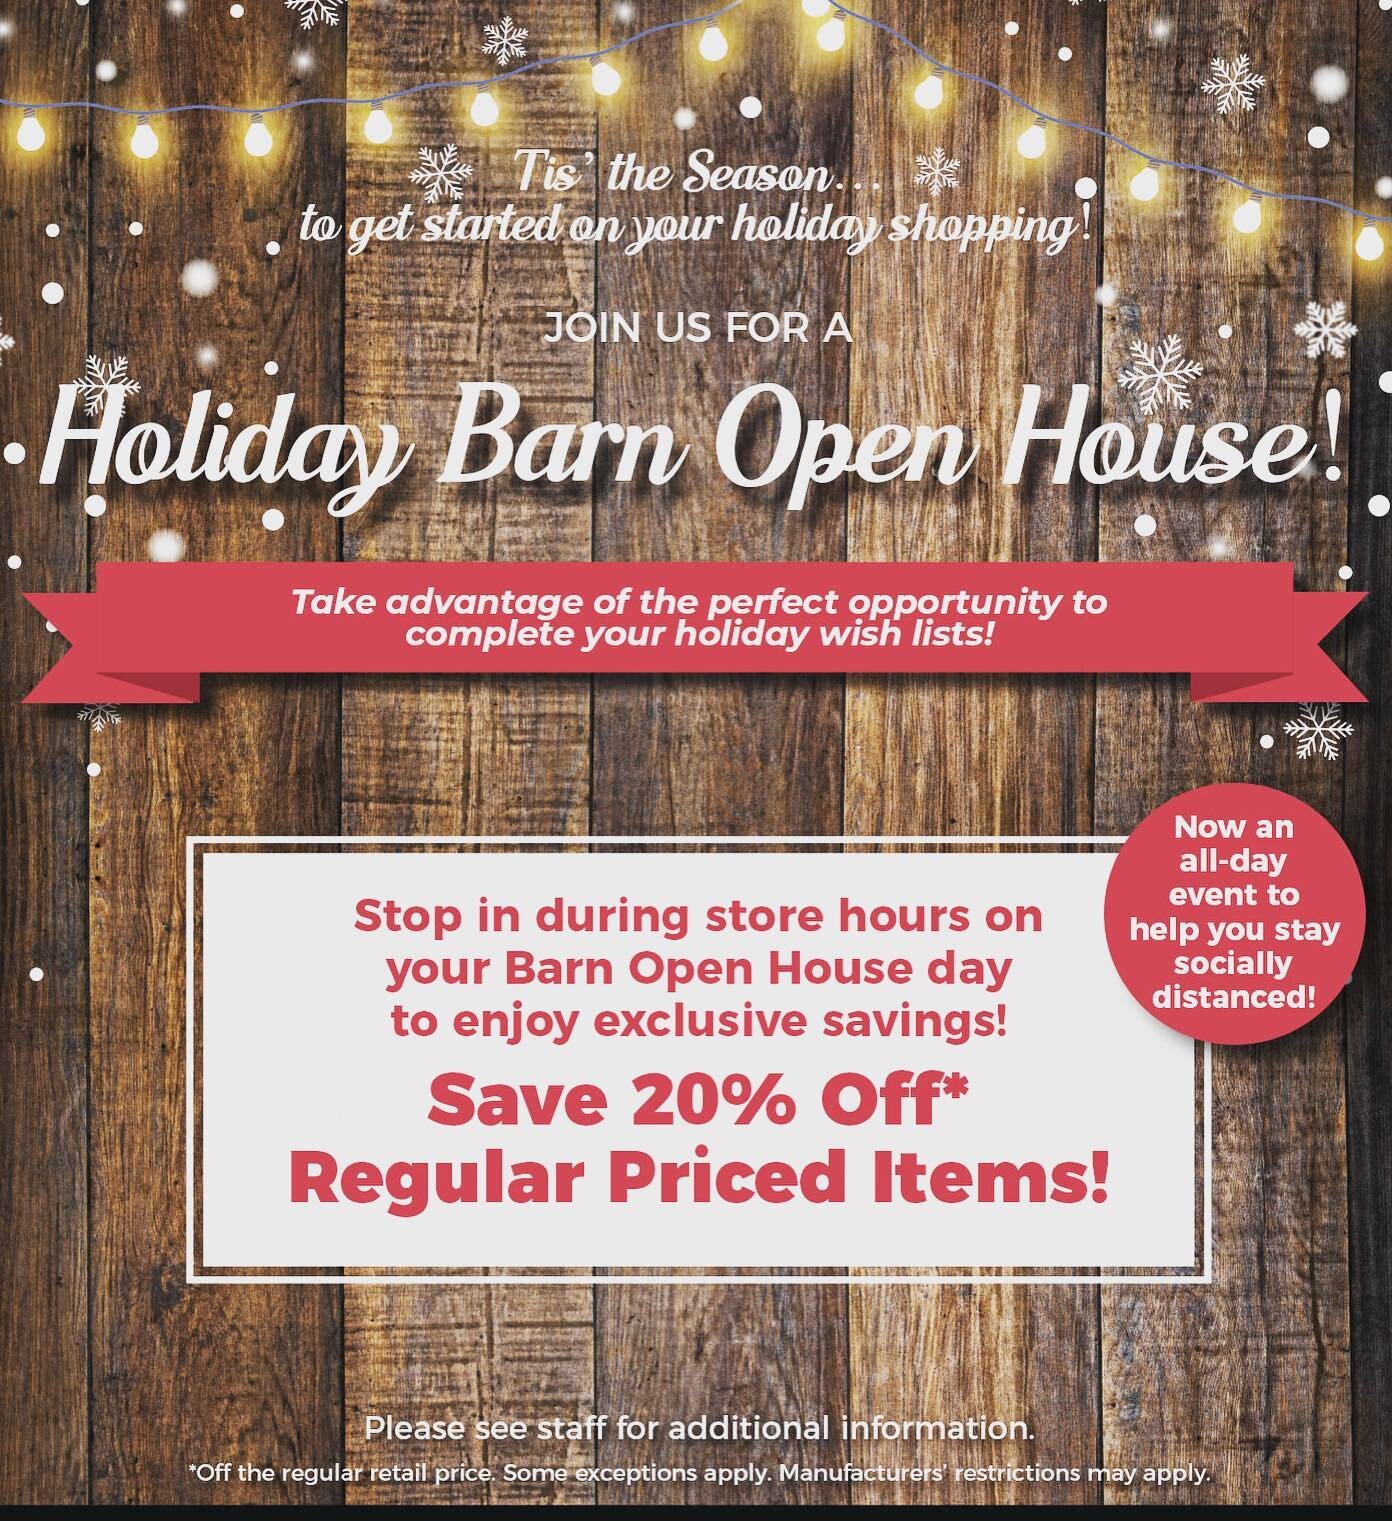 Attention Benchmark students! We have partnered with @greenhawk_orangeville to host a holiday barn party with a socially distanced twist!
&bull;
On Sunday, December 6th, registered Benchmark students can visit Greenhawk Orangeville during store hours